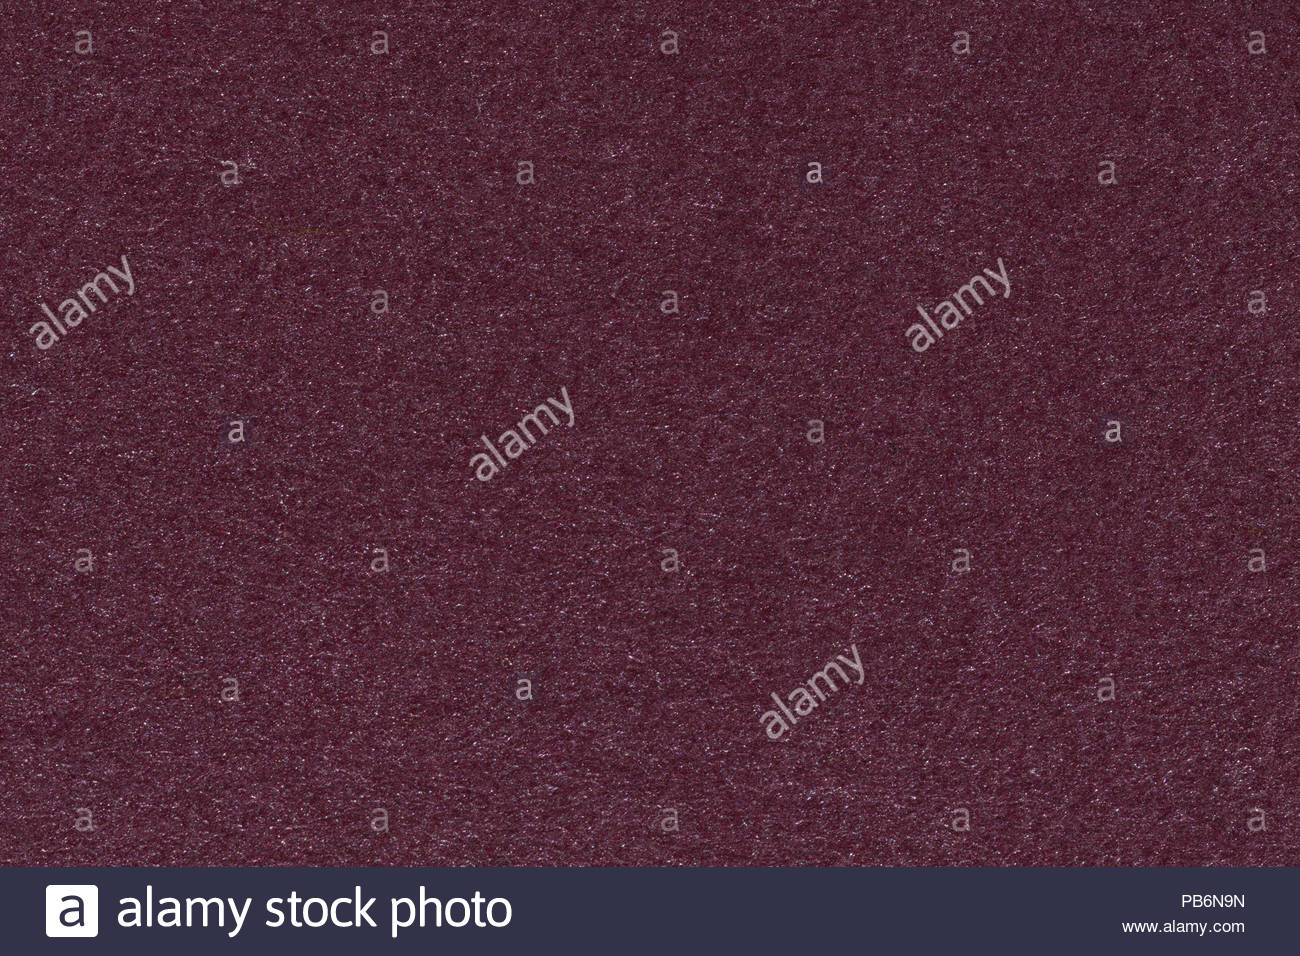 Burgundy Suede Texture Background Close Yp Stock Photo